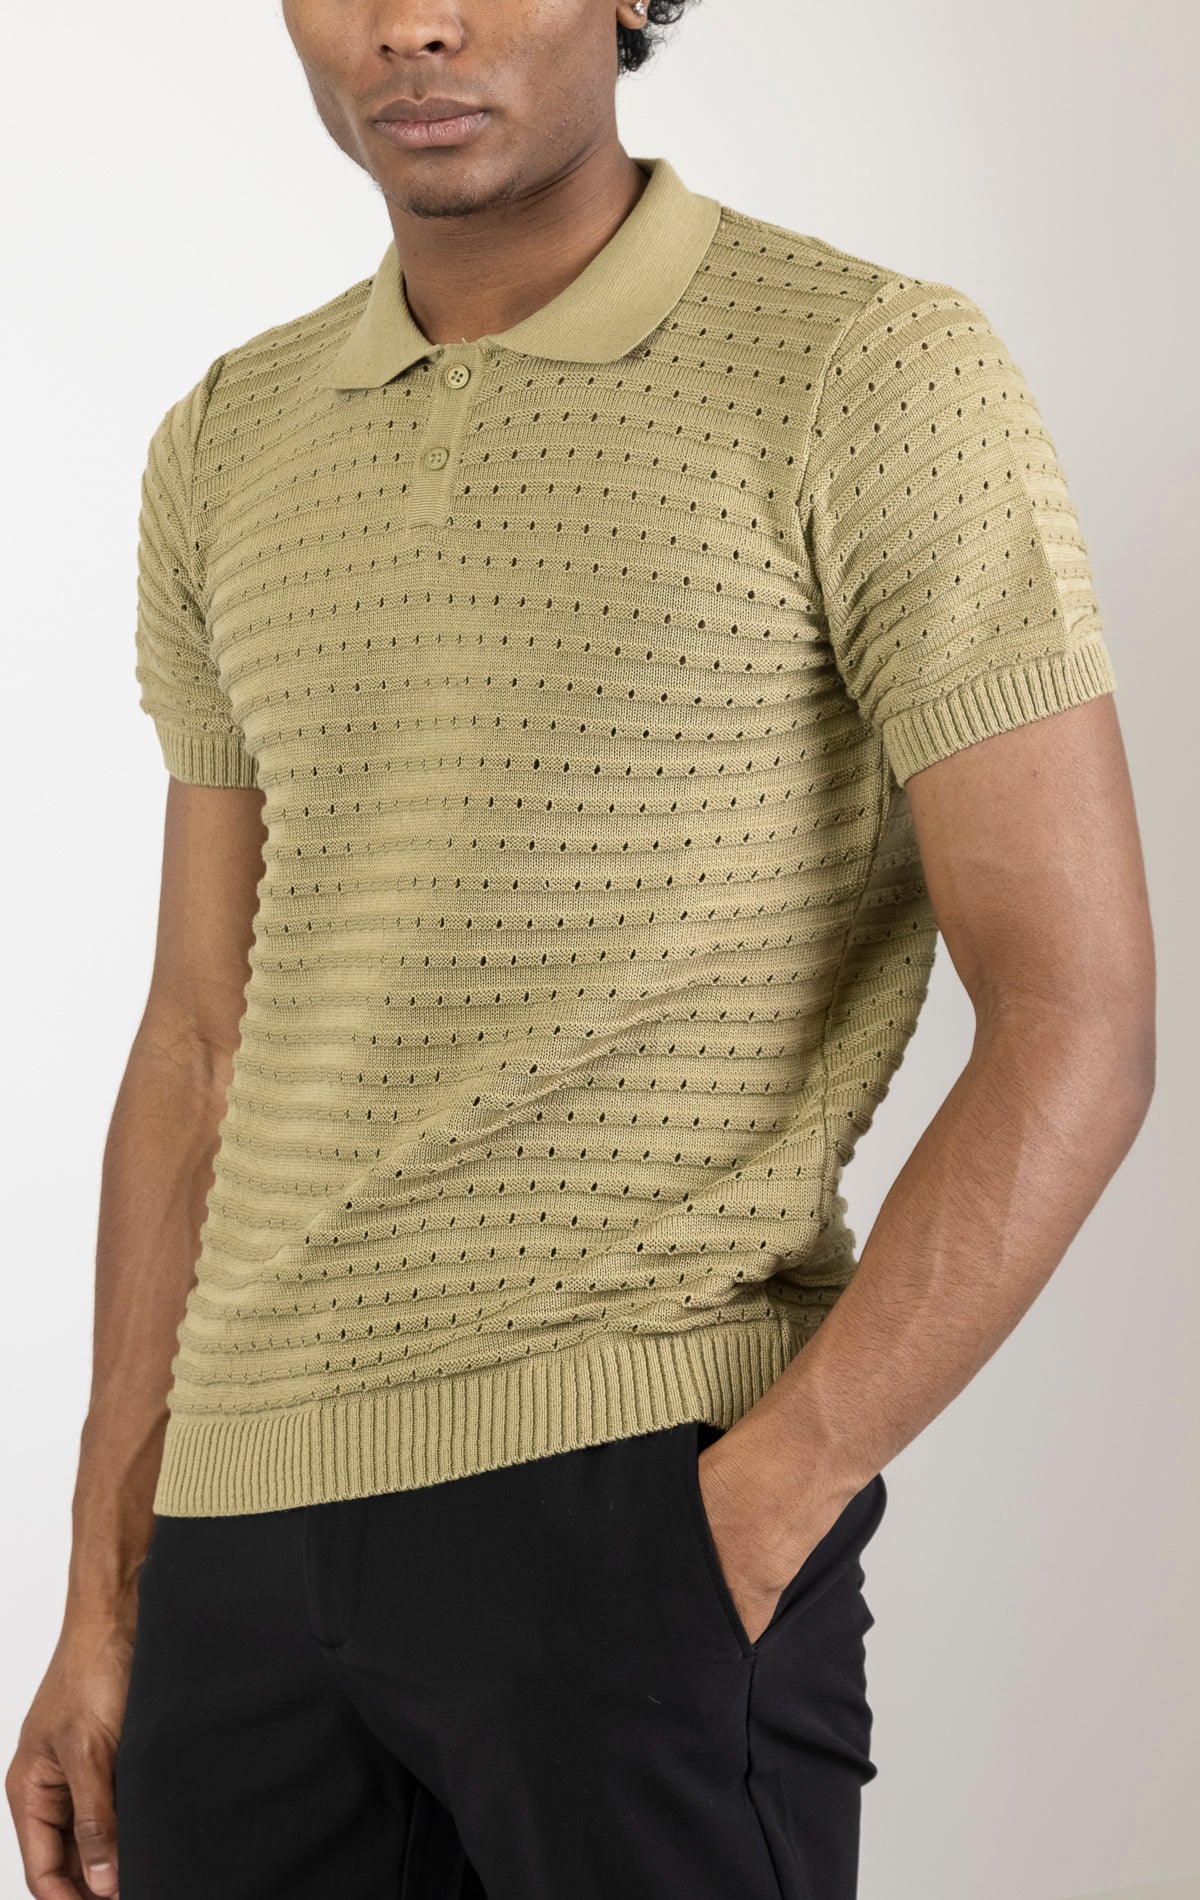 Men's eyelet short sleeve polo tee in light green. The shirt is made from a soft and breathable fabric (50% viscose, 50% polyamide) and features a classic polo collar, short sleeves, and delicate eyelet detailing along the sleeves.